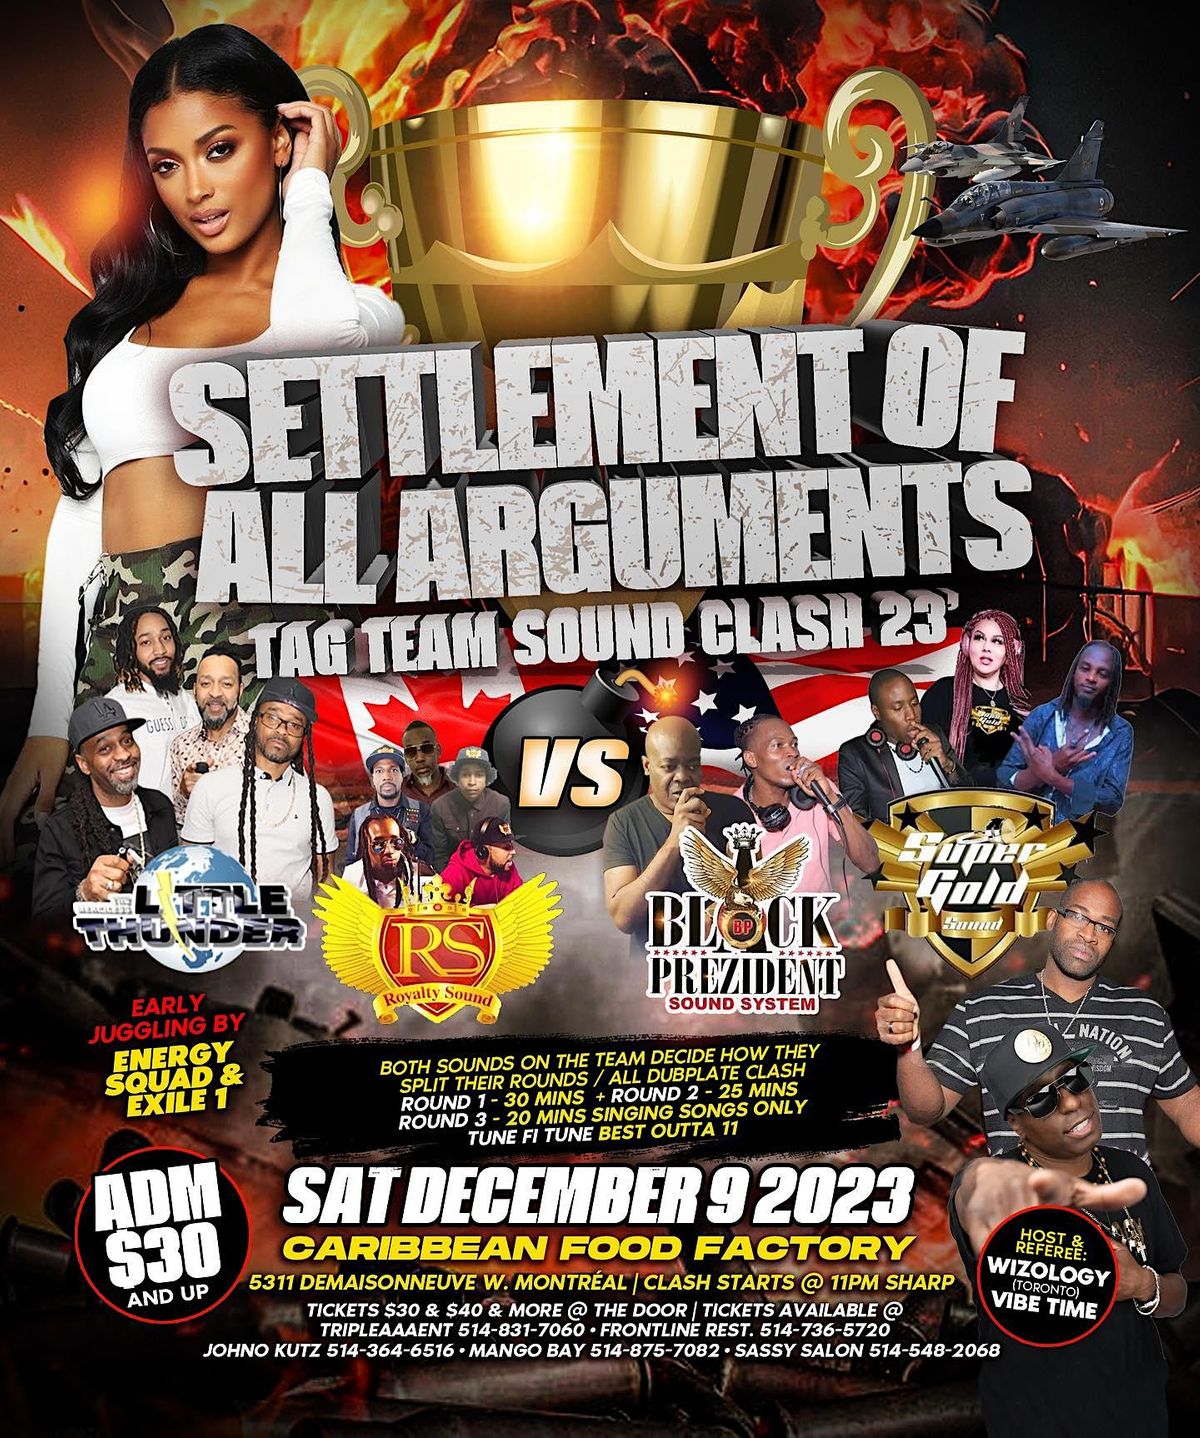 TRIPLE AAA ENT & ROYALTY ENT PROUDLY PRESENTS: SETTLEMENT OF ALL ARGUMENTS